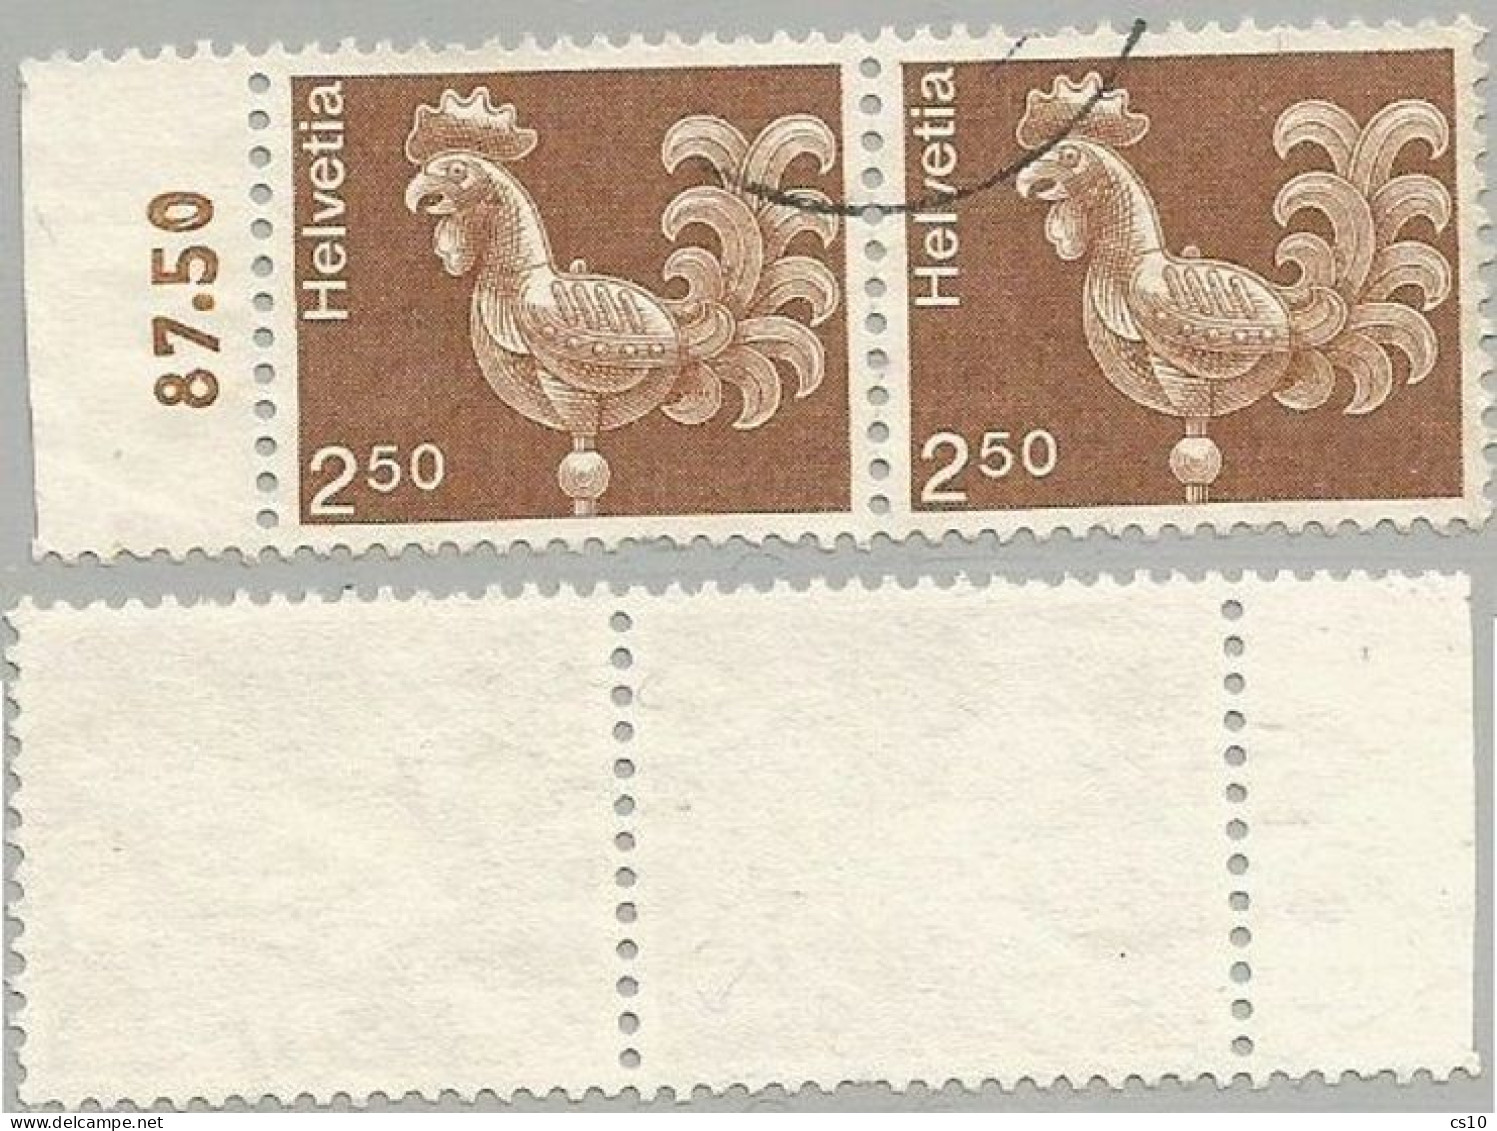 Suisse 1975 Artworks Wheatercock FS.2,50 - Scarce Variety NON FLUO PAPER - #2 Pcs In Horiz. Pair With Sheet Margin - Oblitérés